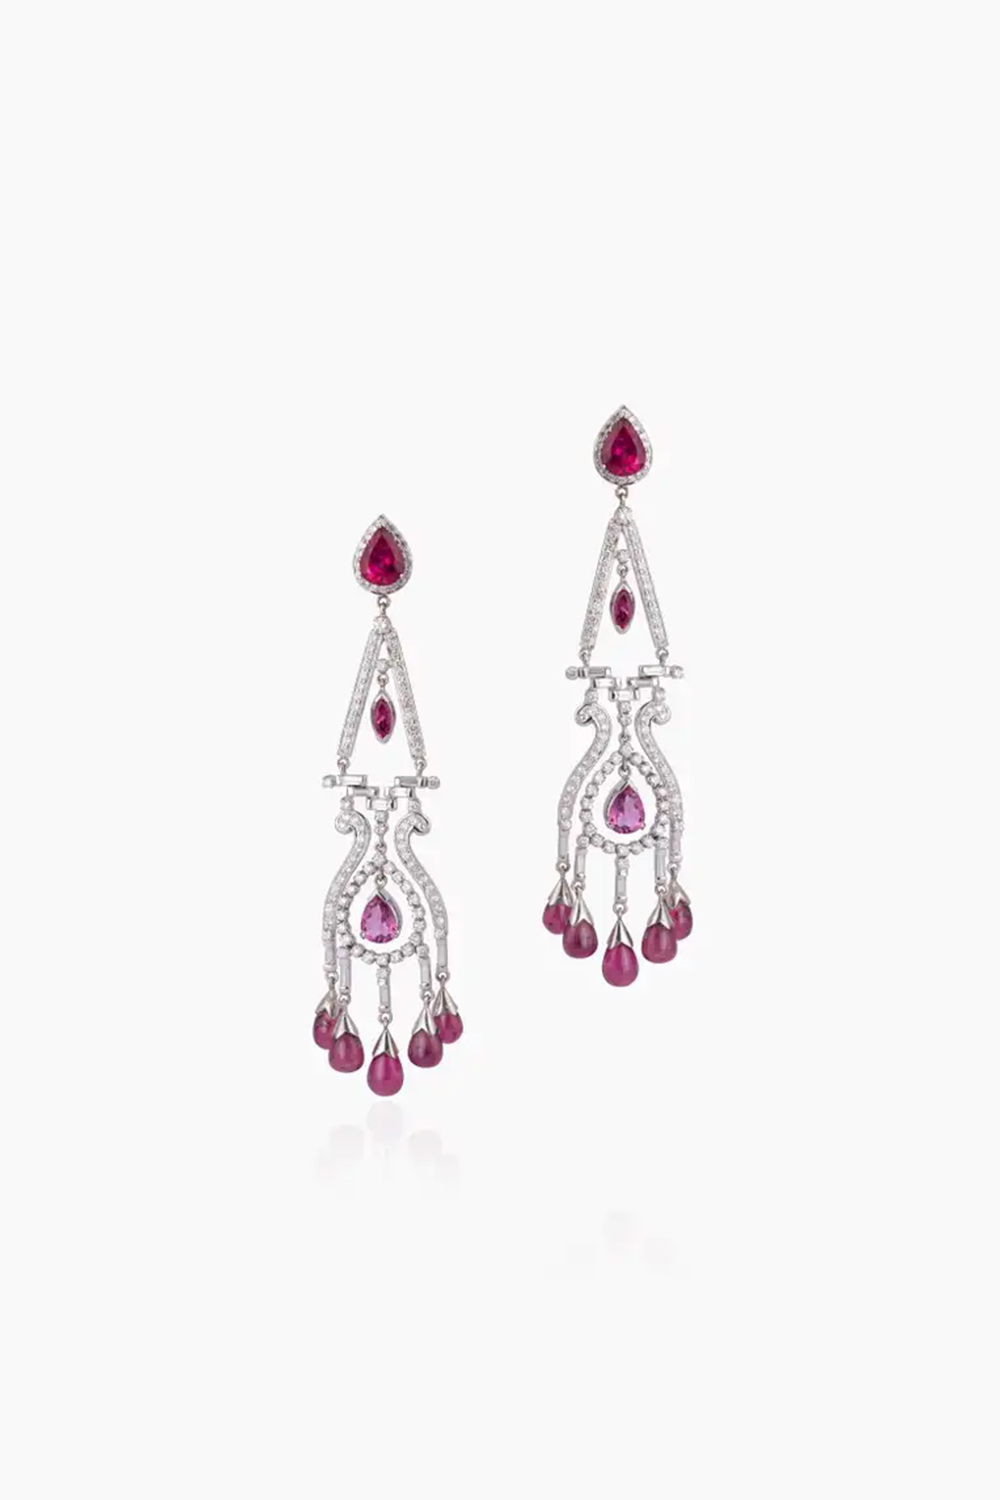 18k gold 2.69cts Diamond and 21.58cts Ruby Light Earring